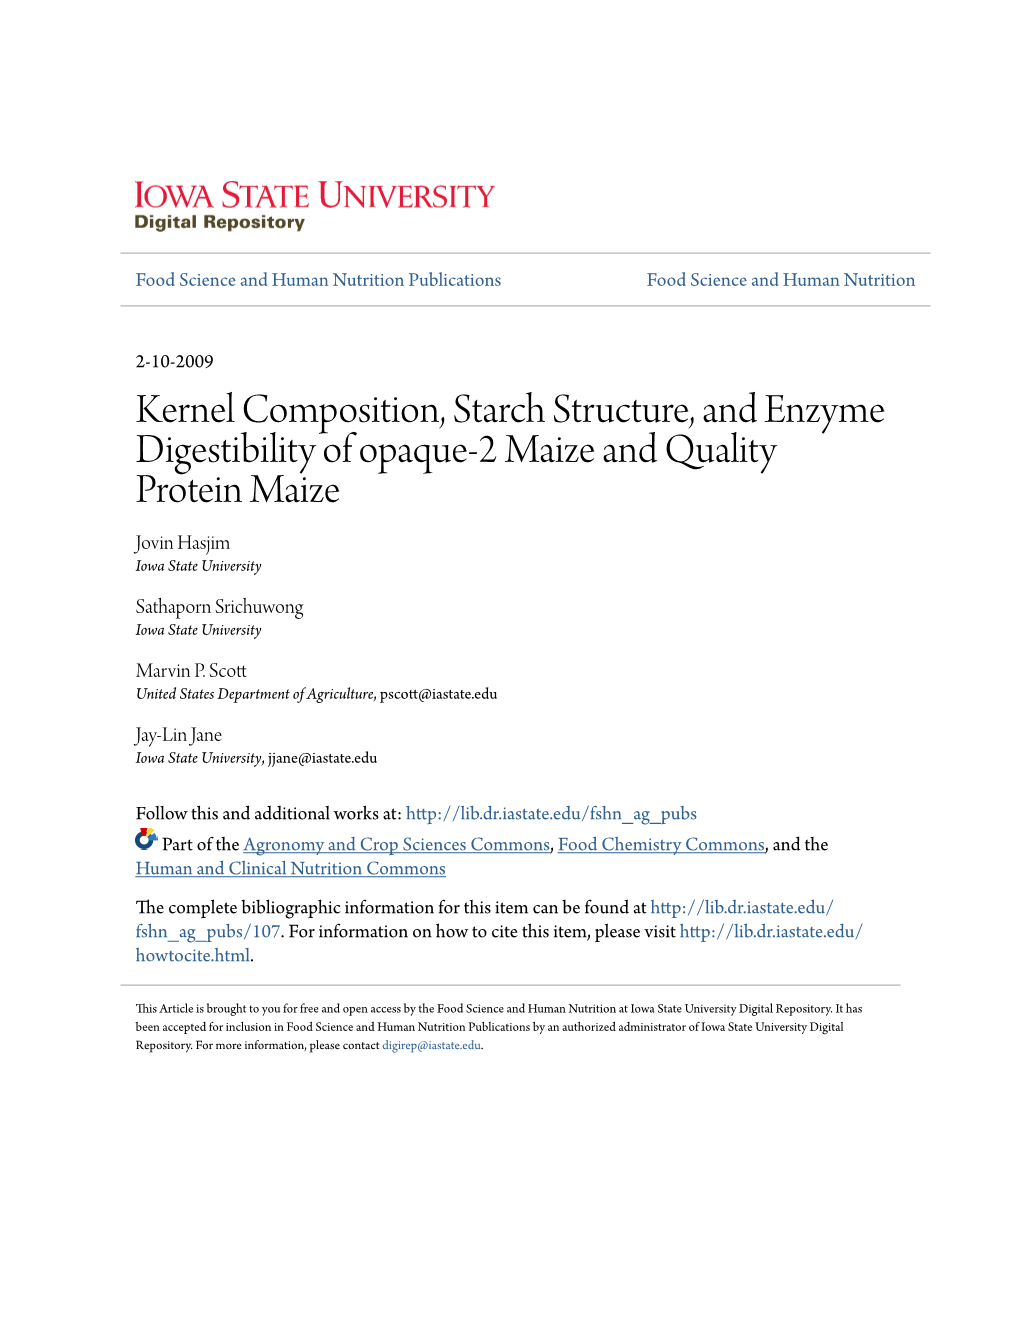 Kernel Composition, Starch Structure, and Enzyme Digestibility of Opaque-2 Maize and Quality Protein Maize Jovin Hasjim Iowa State University